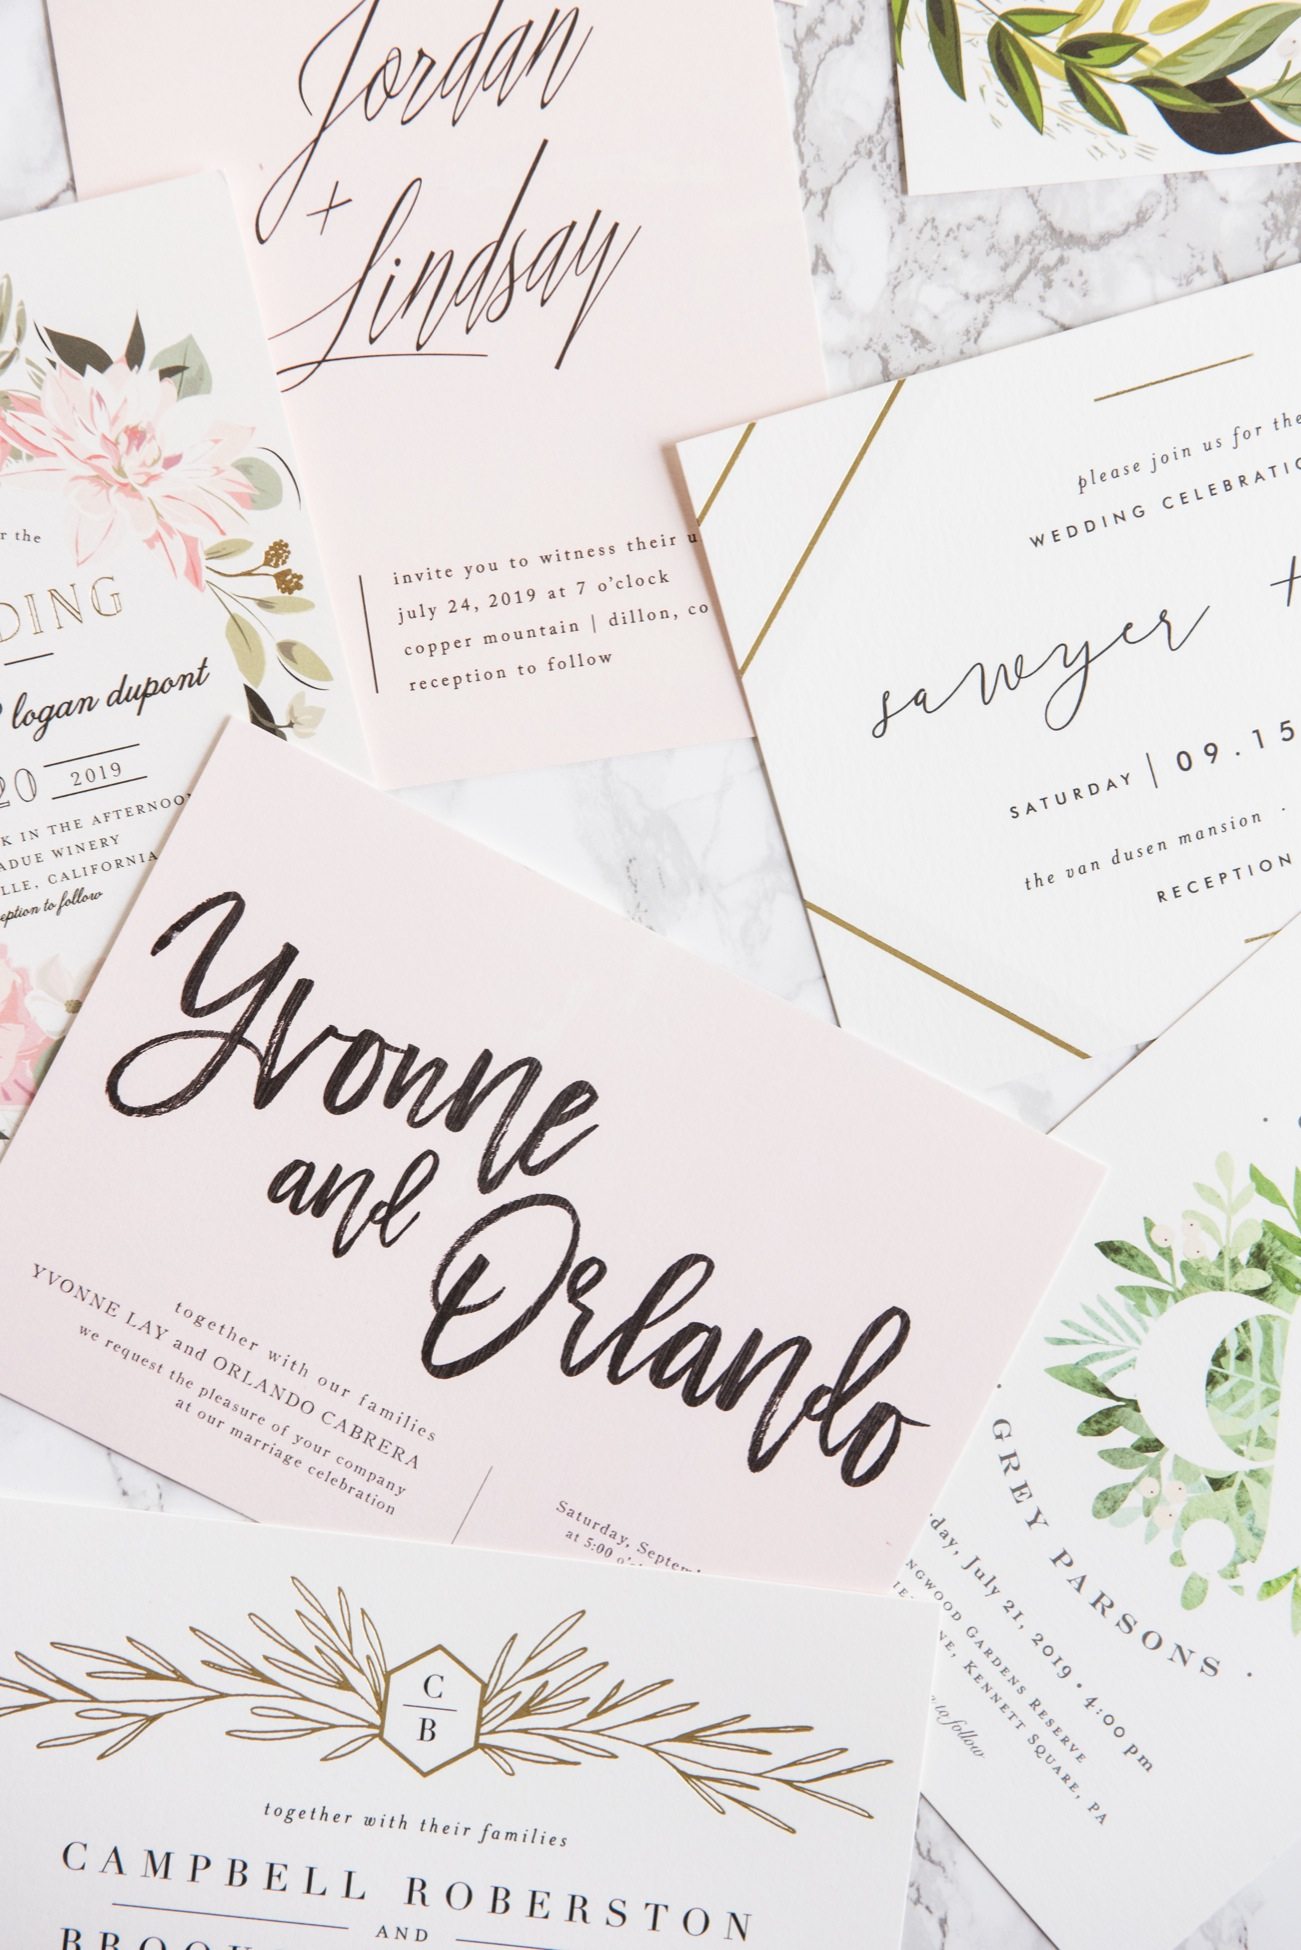 Modern gold foil, hand lettered wedding invitations | Wedding ideas, entertaining tips, wedding planning tips, party ideas and more from @cydconverse